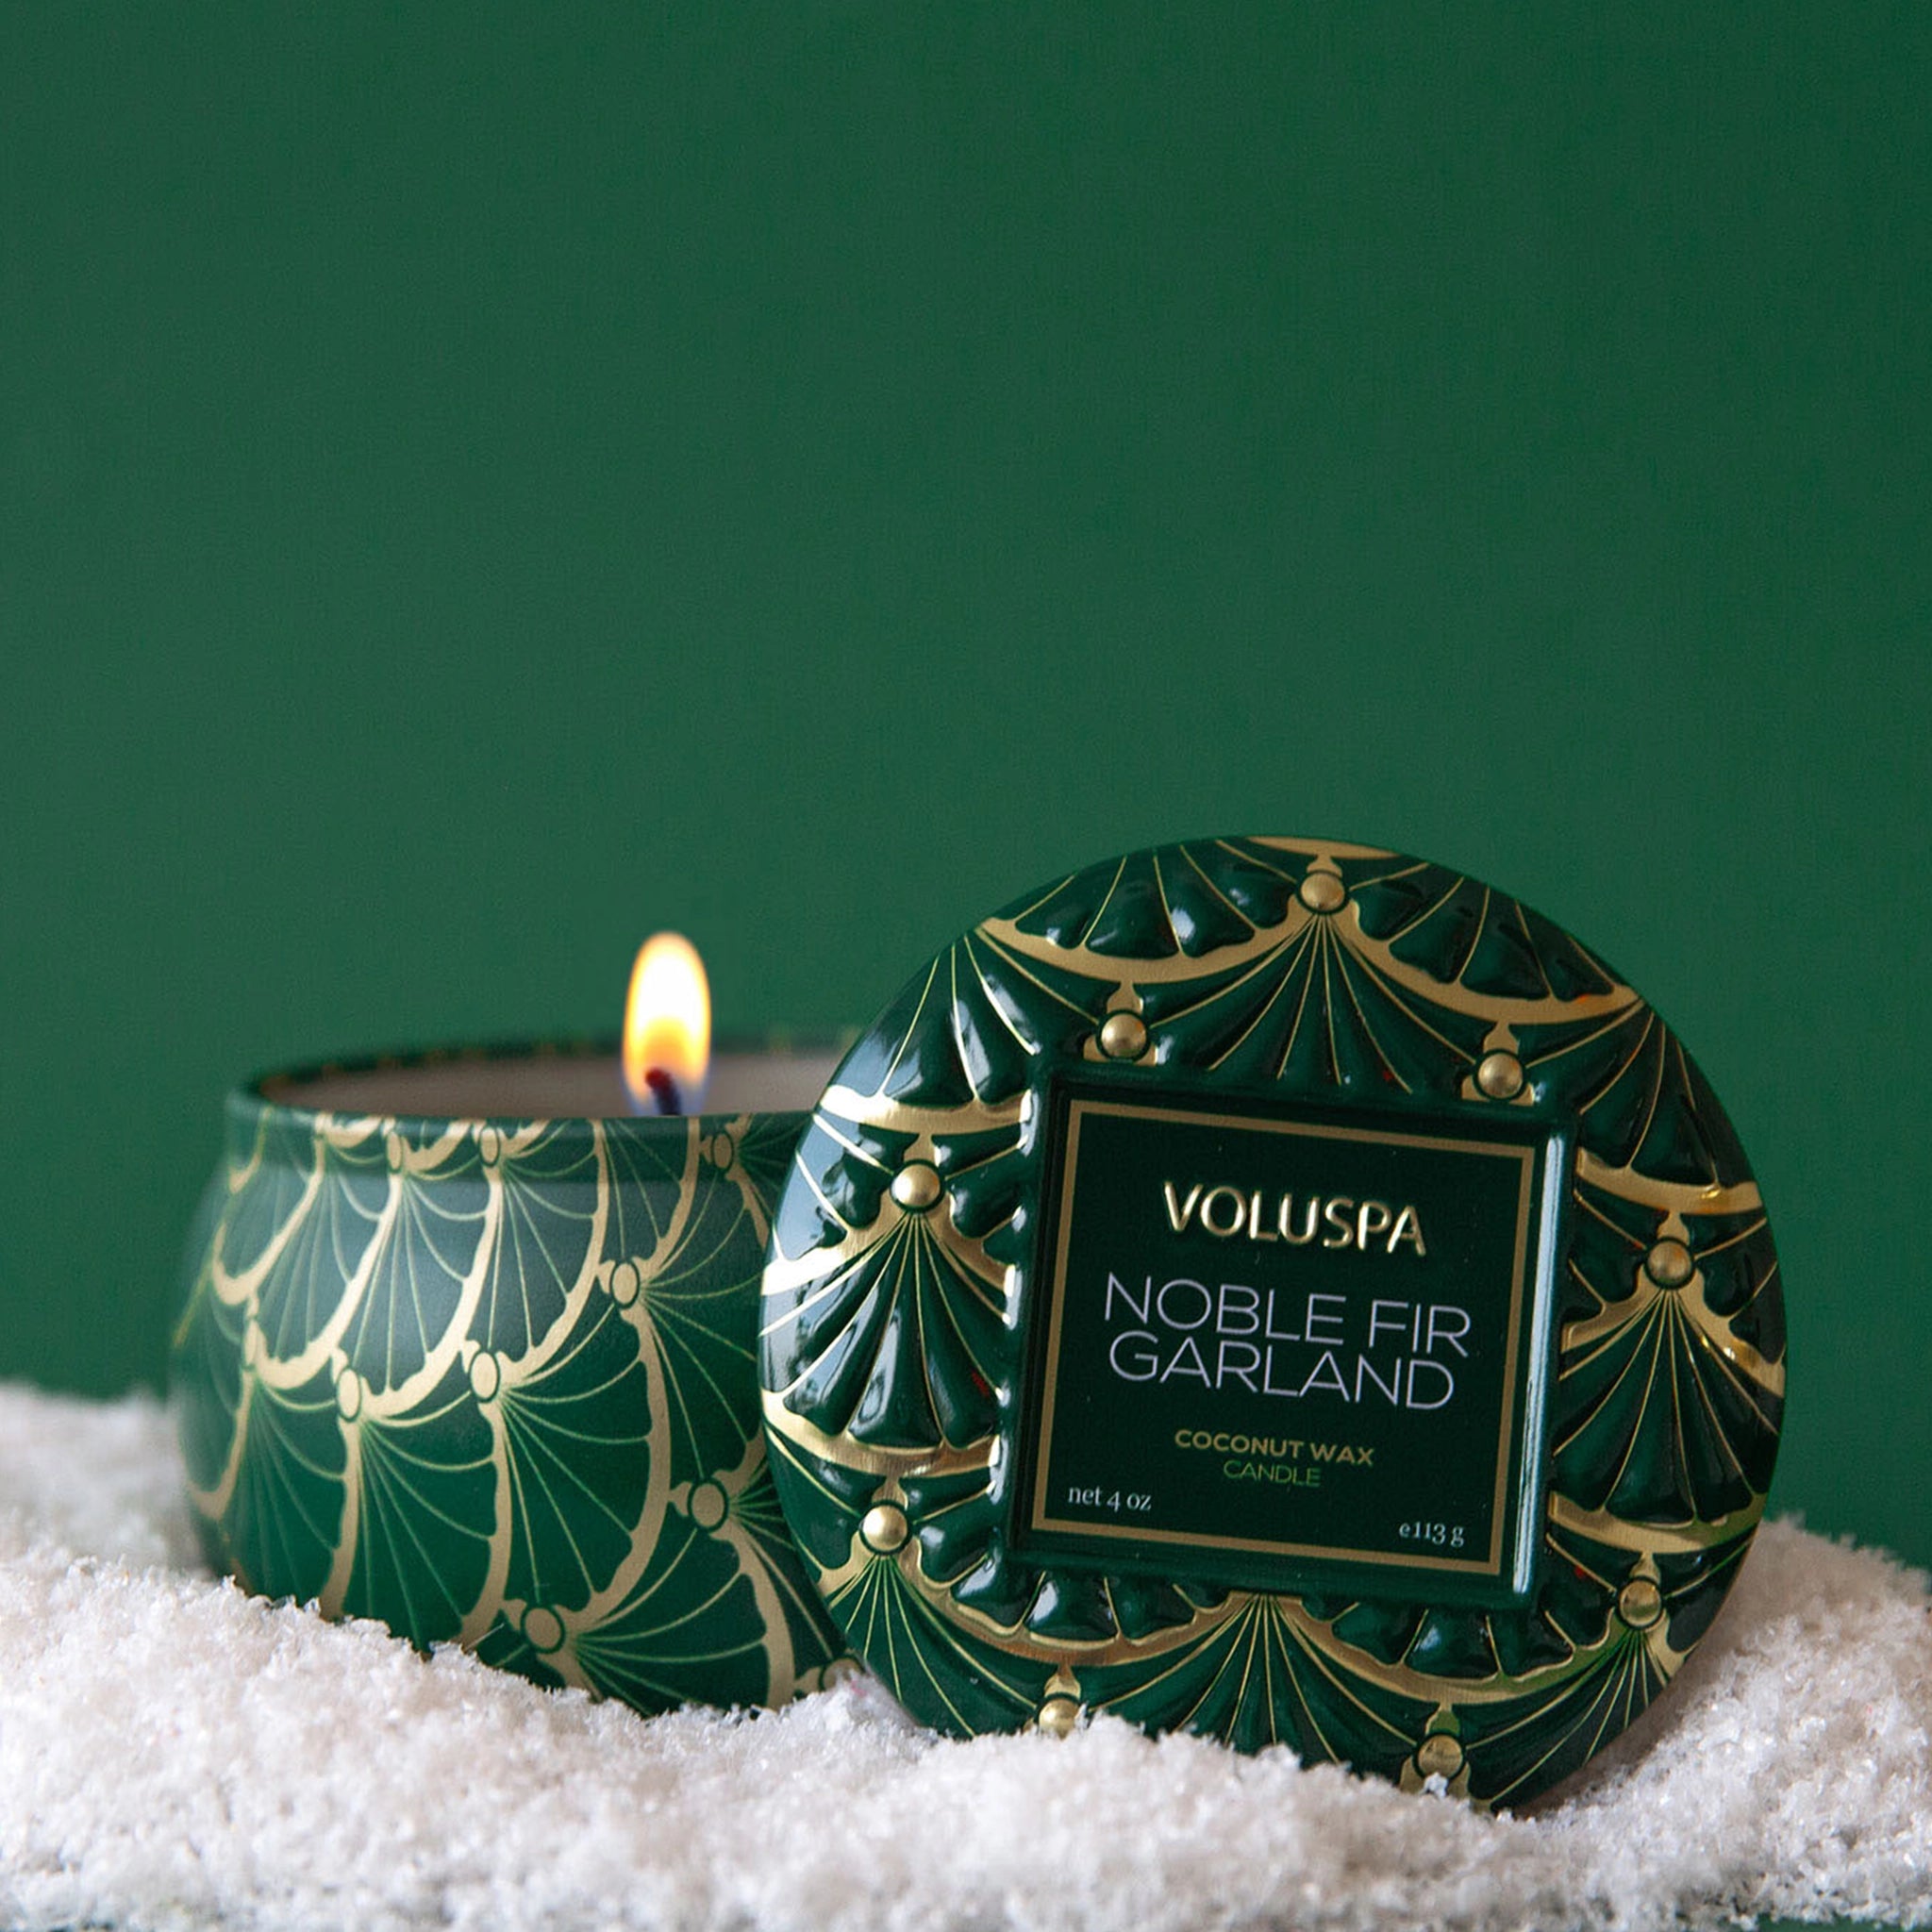 On a green background is a green metal mini tin candle with a gold and green design and a label on the lid that reads, "Voluspa Noble Fir Garland".